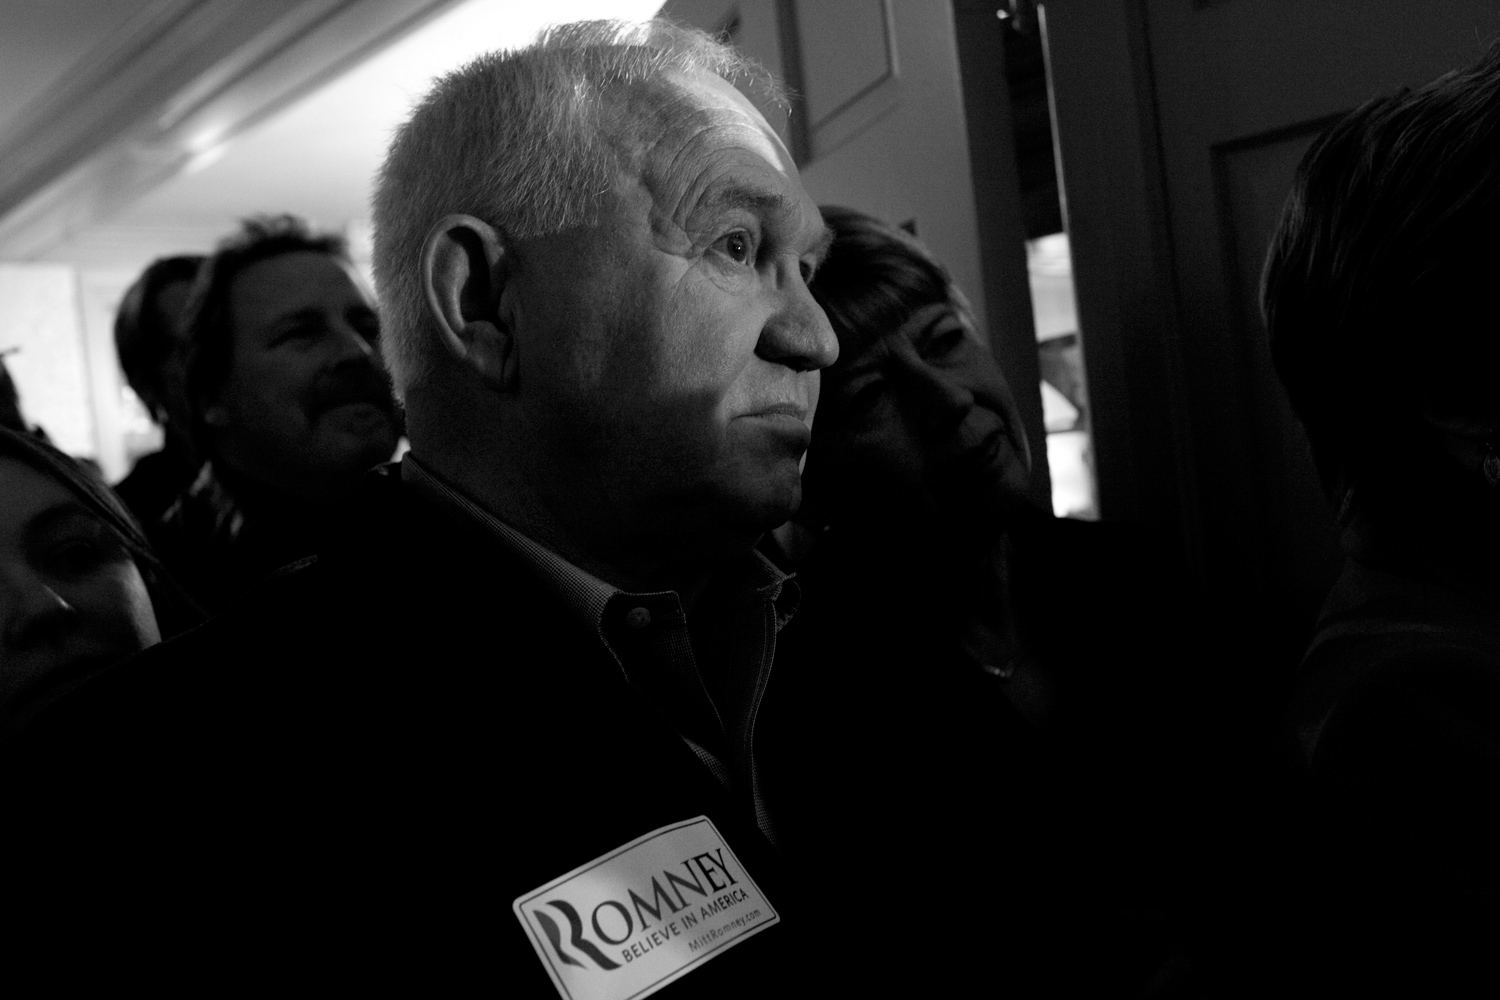 March 5, 2012. A Mitt Romney supporter at a rally at Bryan Place in Zanesville, Ohio.